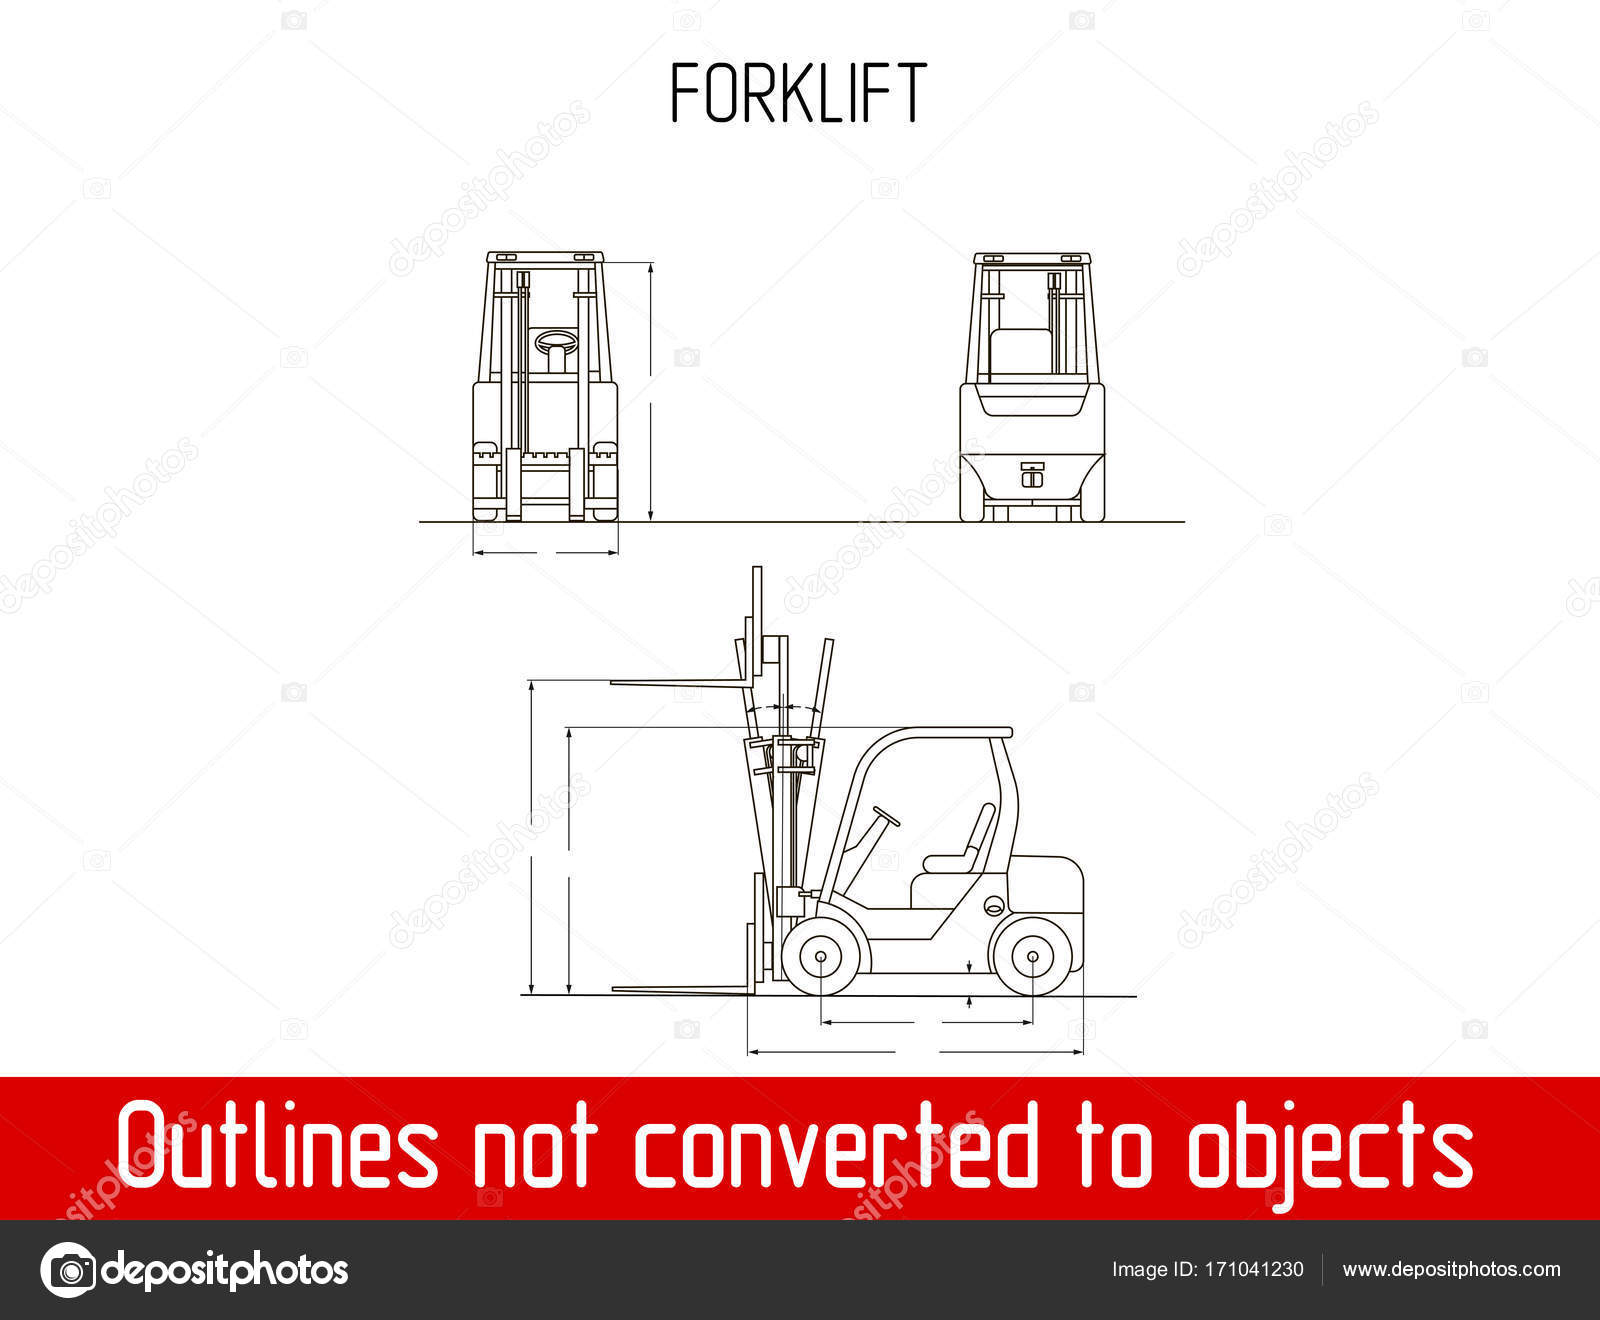 Typical Forklift Overall Dimensions Blueprint Template Illustration Stock Vector C Galimovma79 171041230